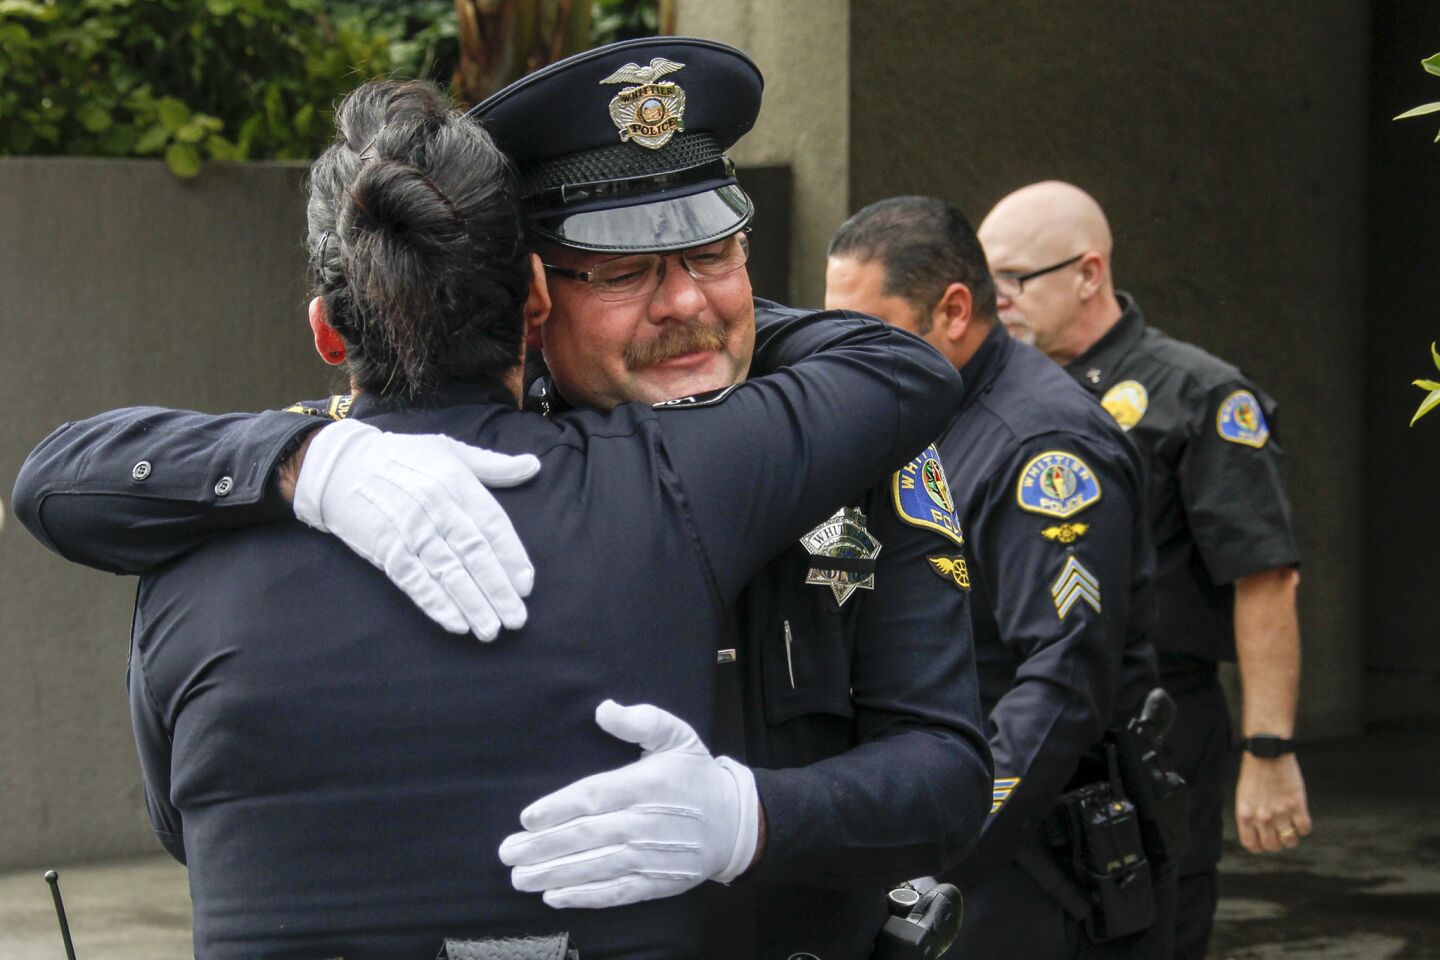 Whittier Police Officer Richard Jensen is comforted by other officers at Rose Hill Memorial Park.